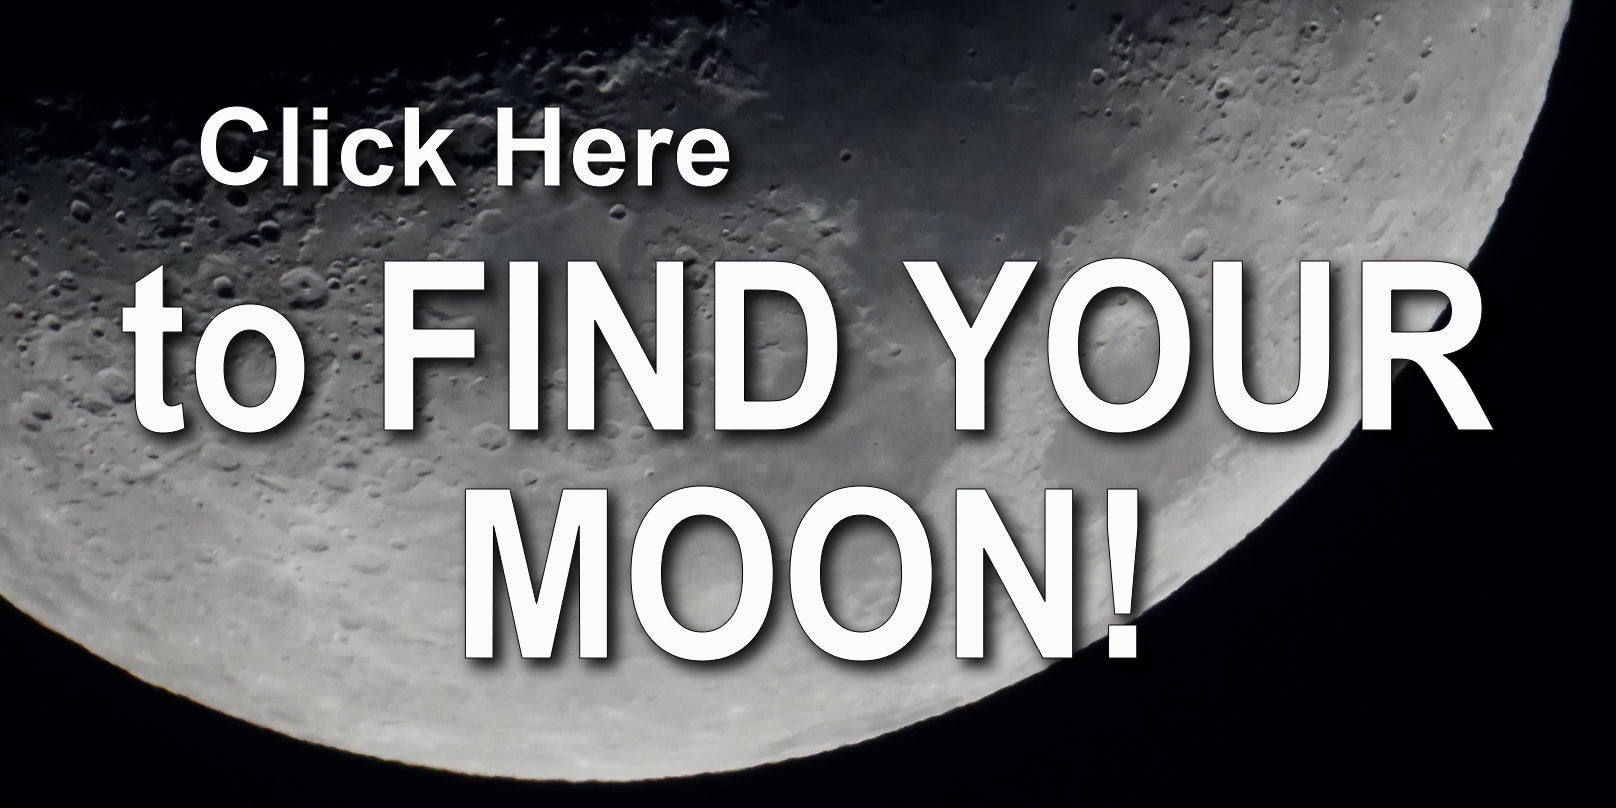 Find Your Moon from Moonglow